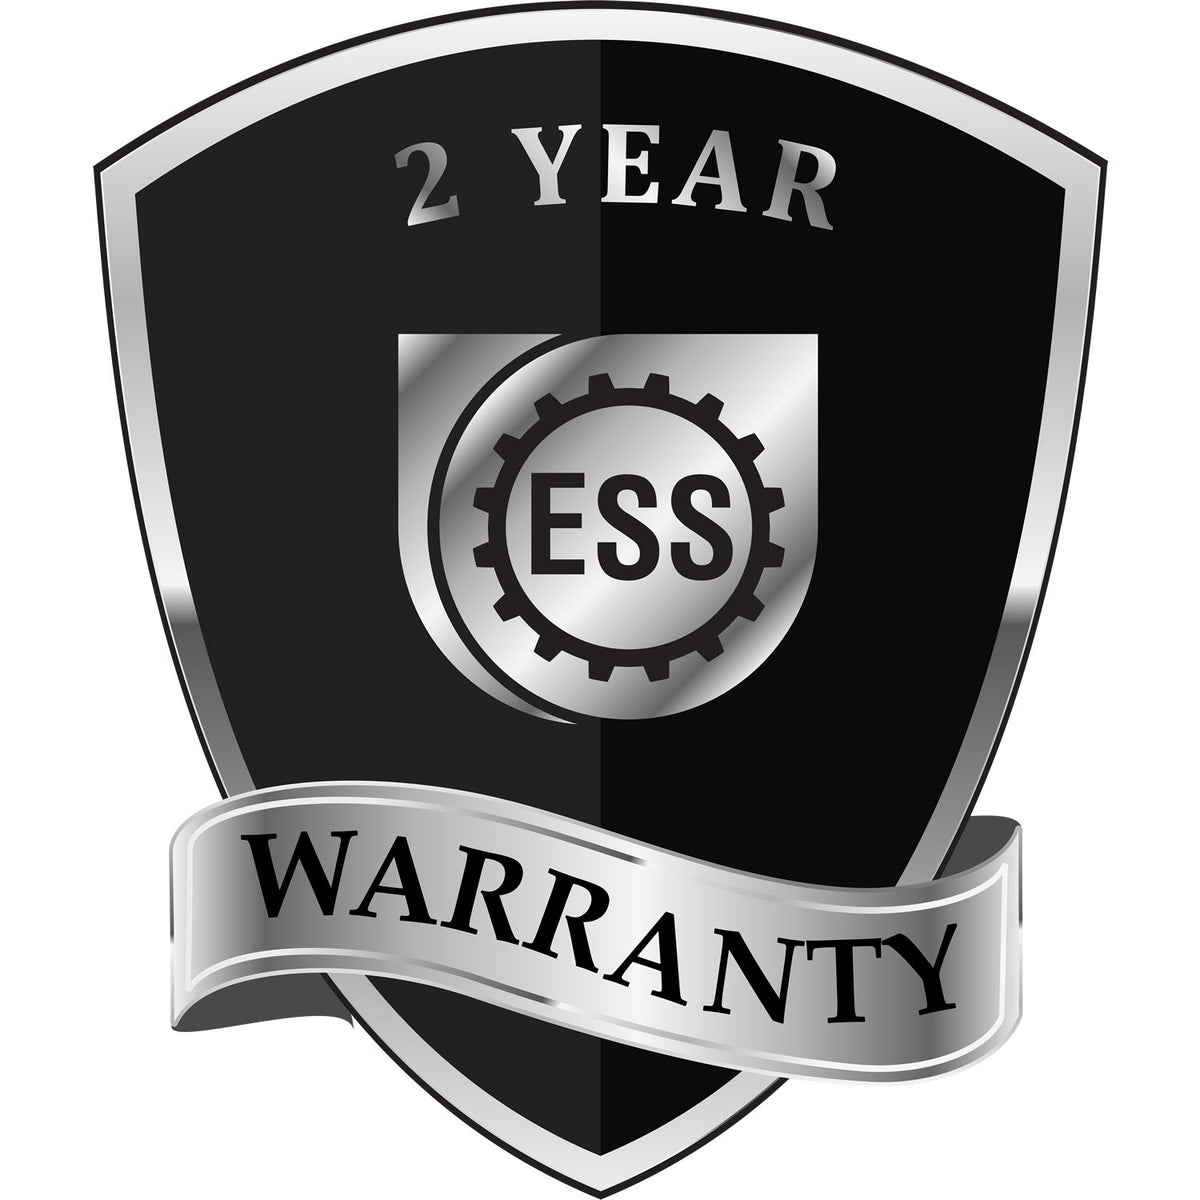 A black and silver badge or emblem showing warranty information for the Heavy Duty Cast Iron Louisiana Geologist Seal Embosser